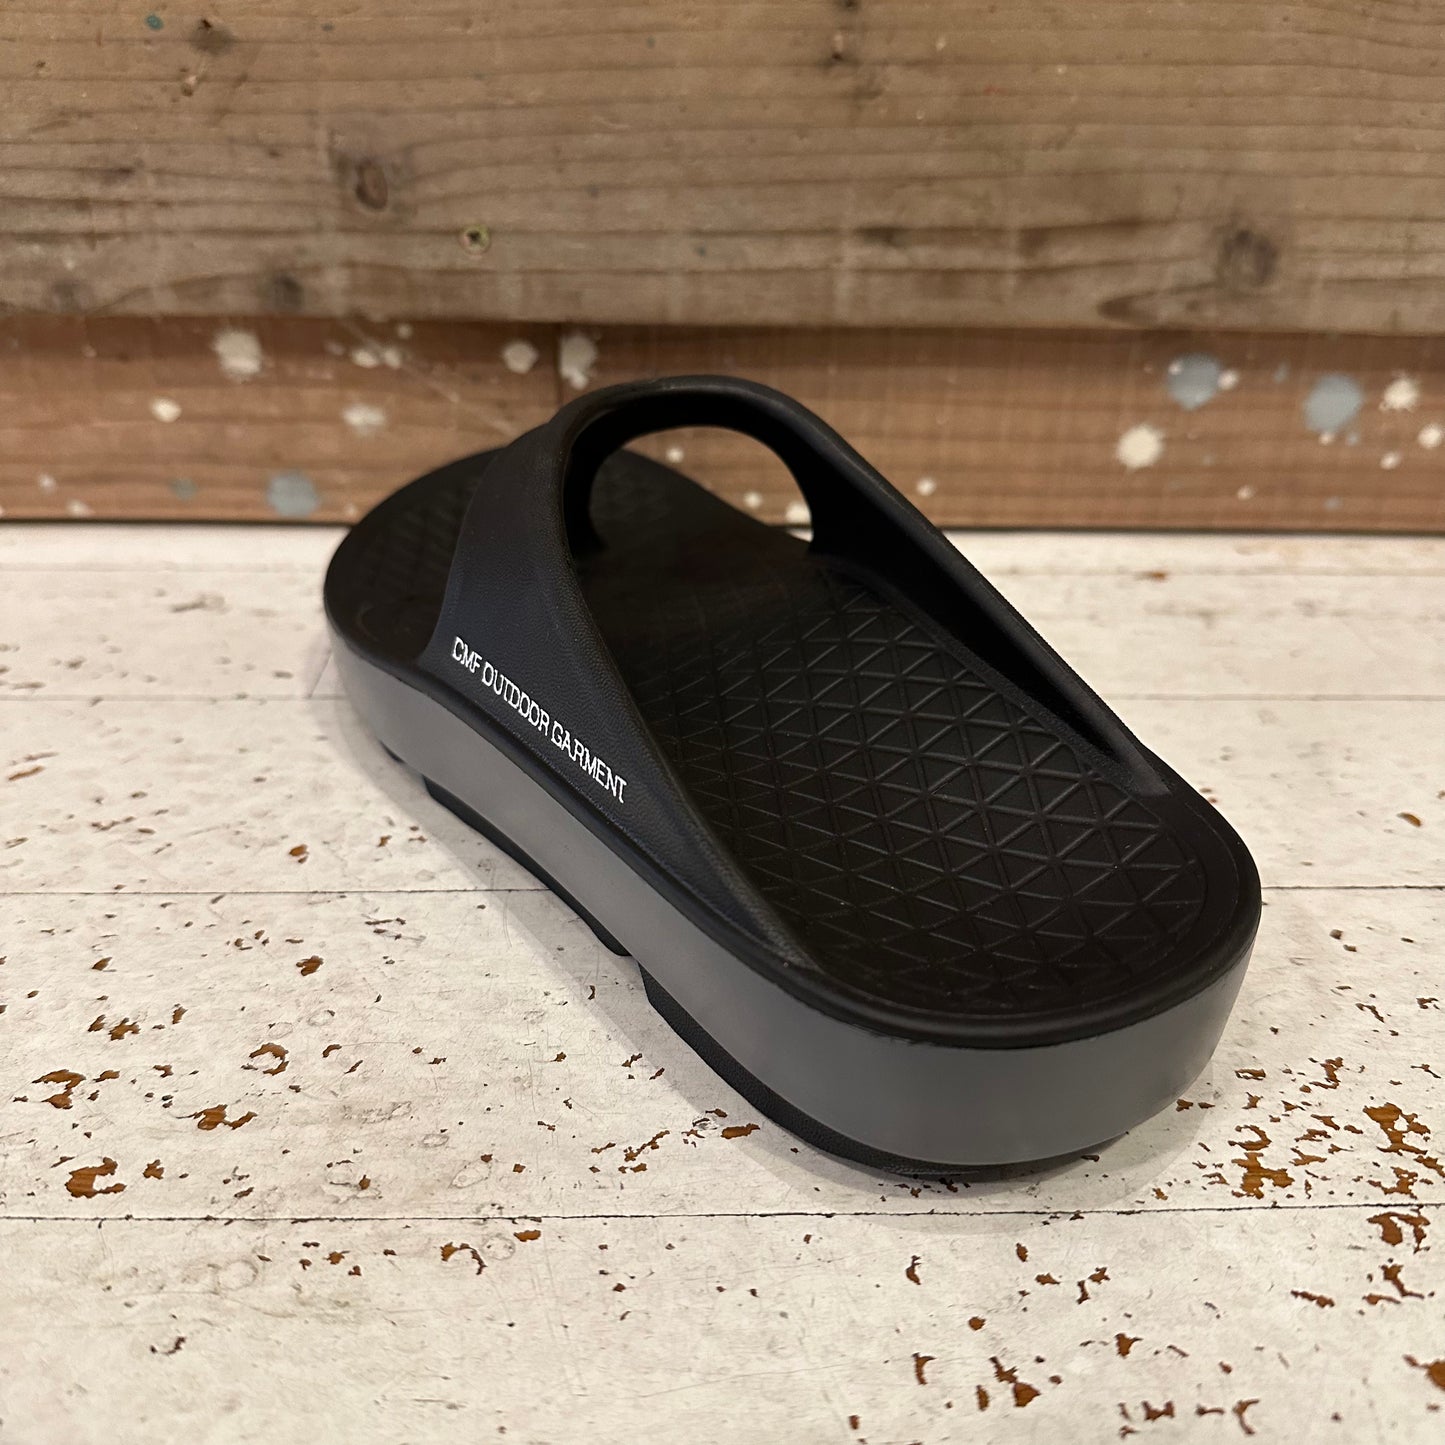 "CMF RECOVERY SANDAL"